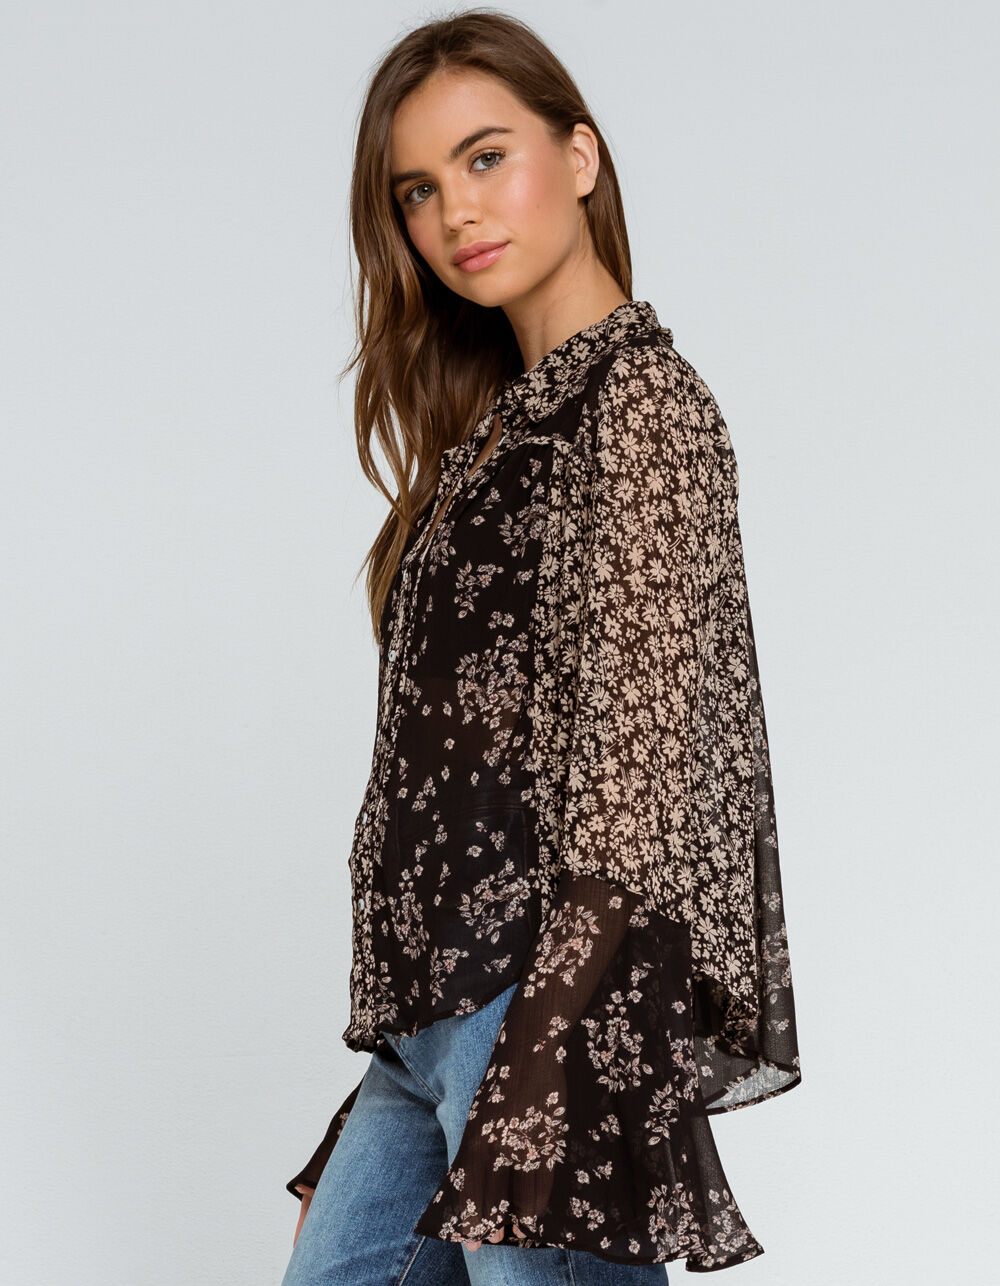 FREE PEOPLE Serena Womens Printed Blouse - BLACK COMBO | Tillys